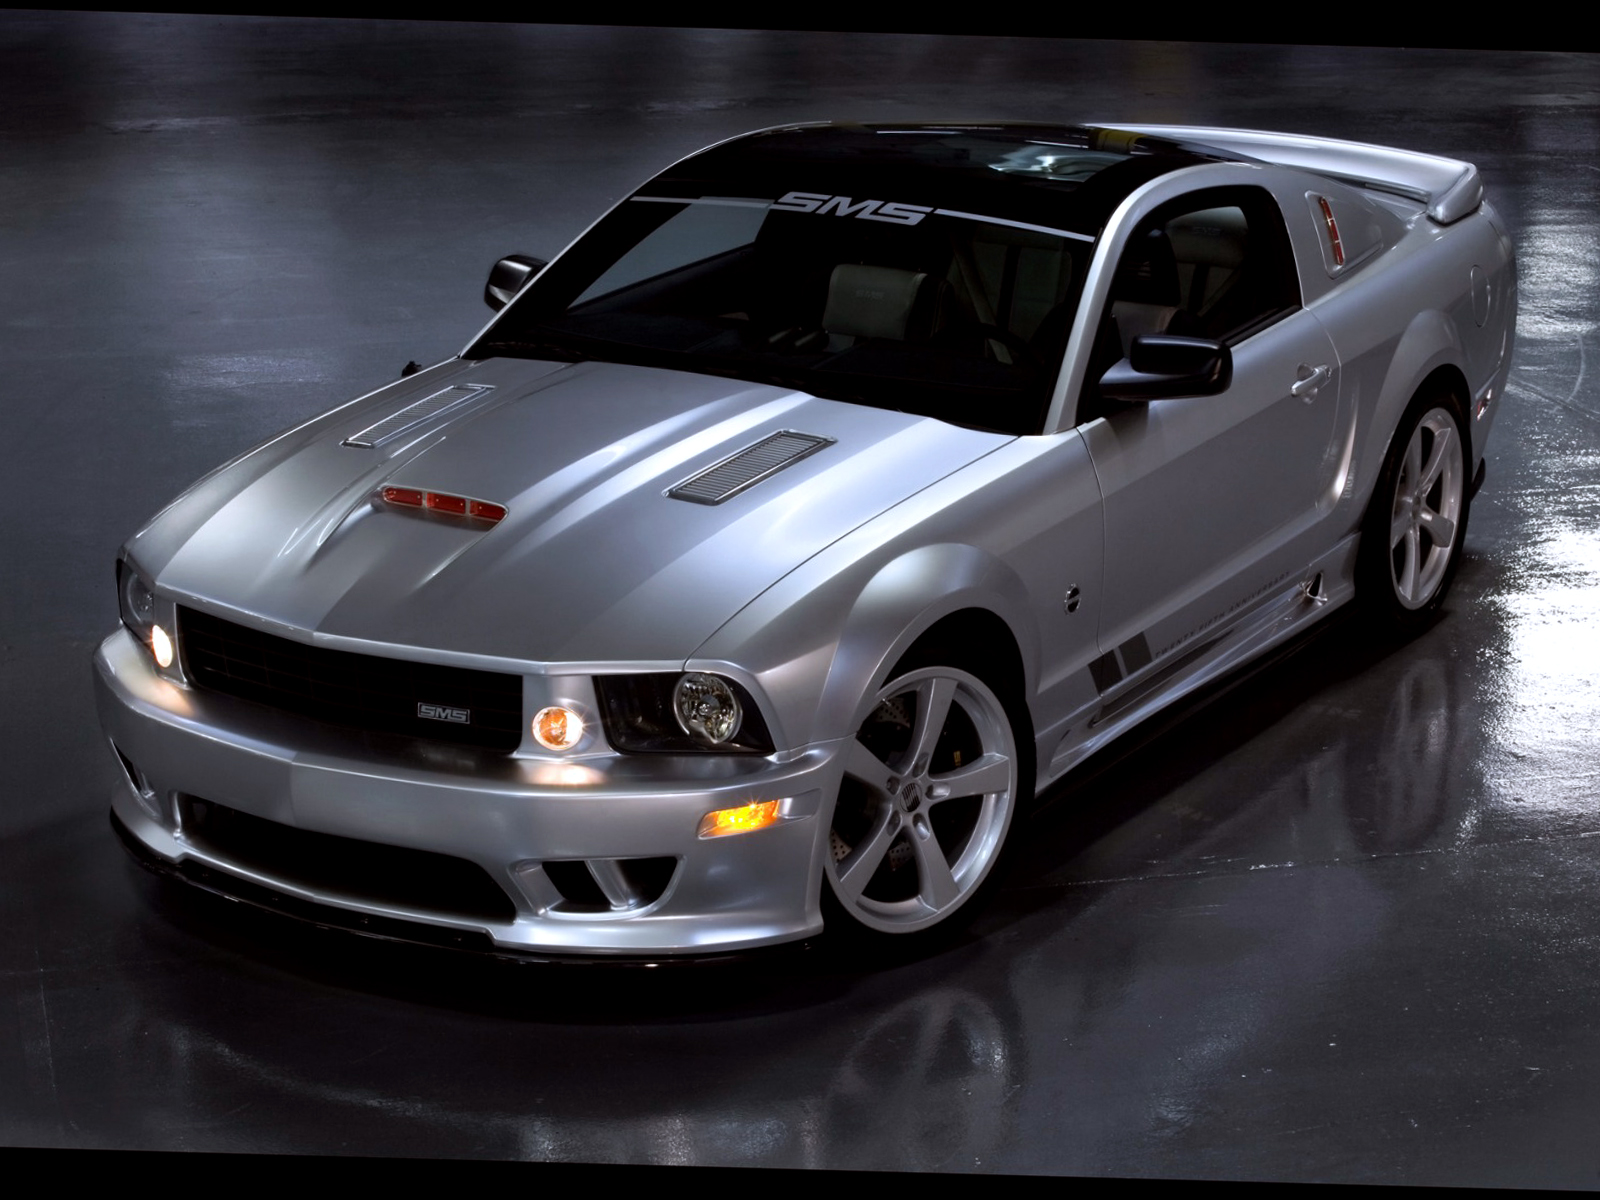 Ford Mustang Silver Car Picture Wallpaper